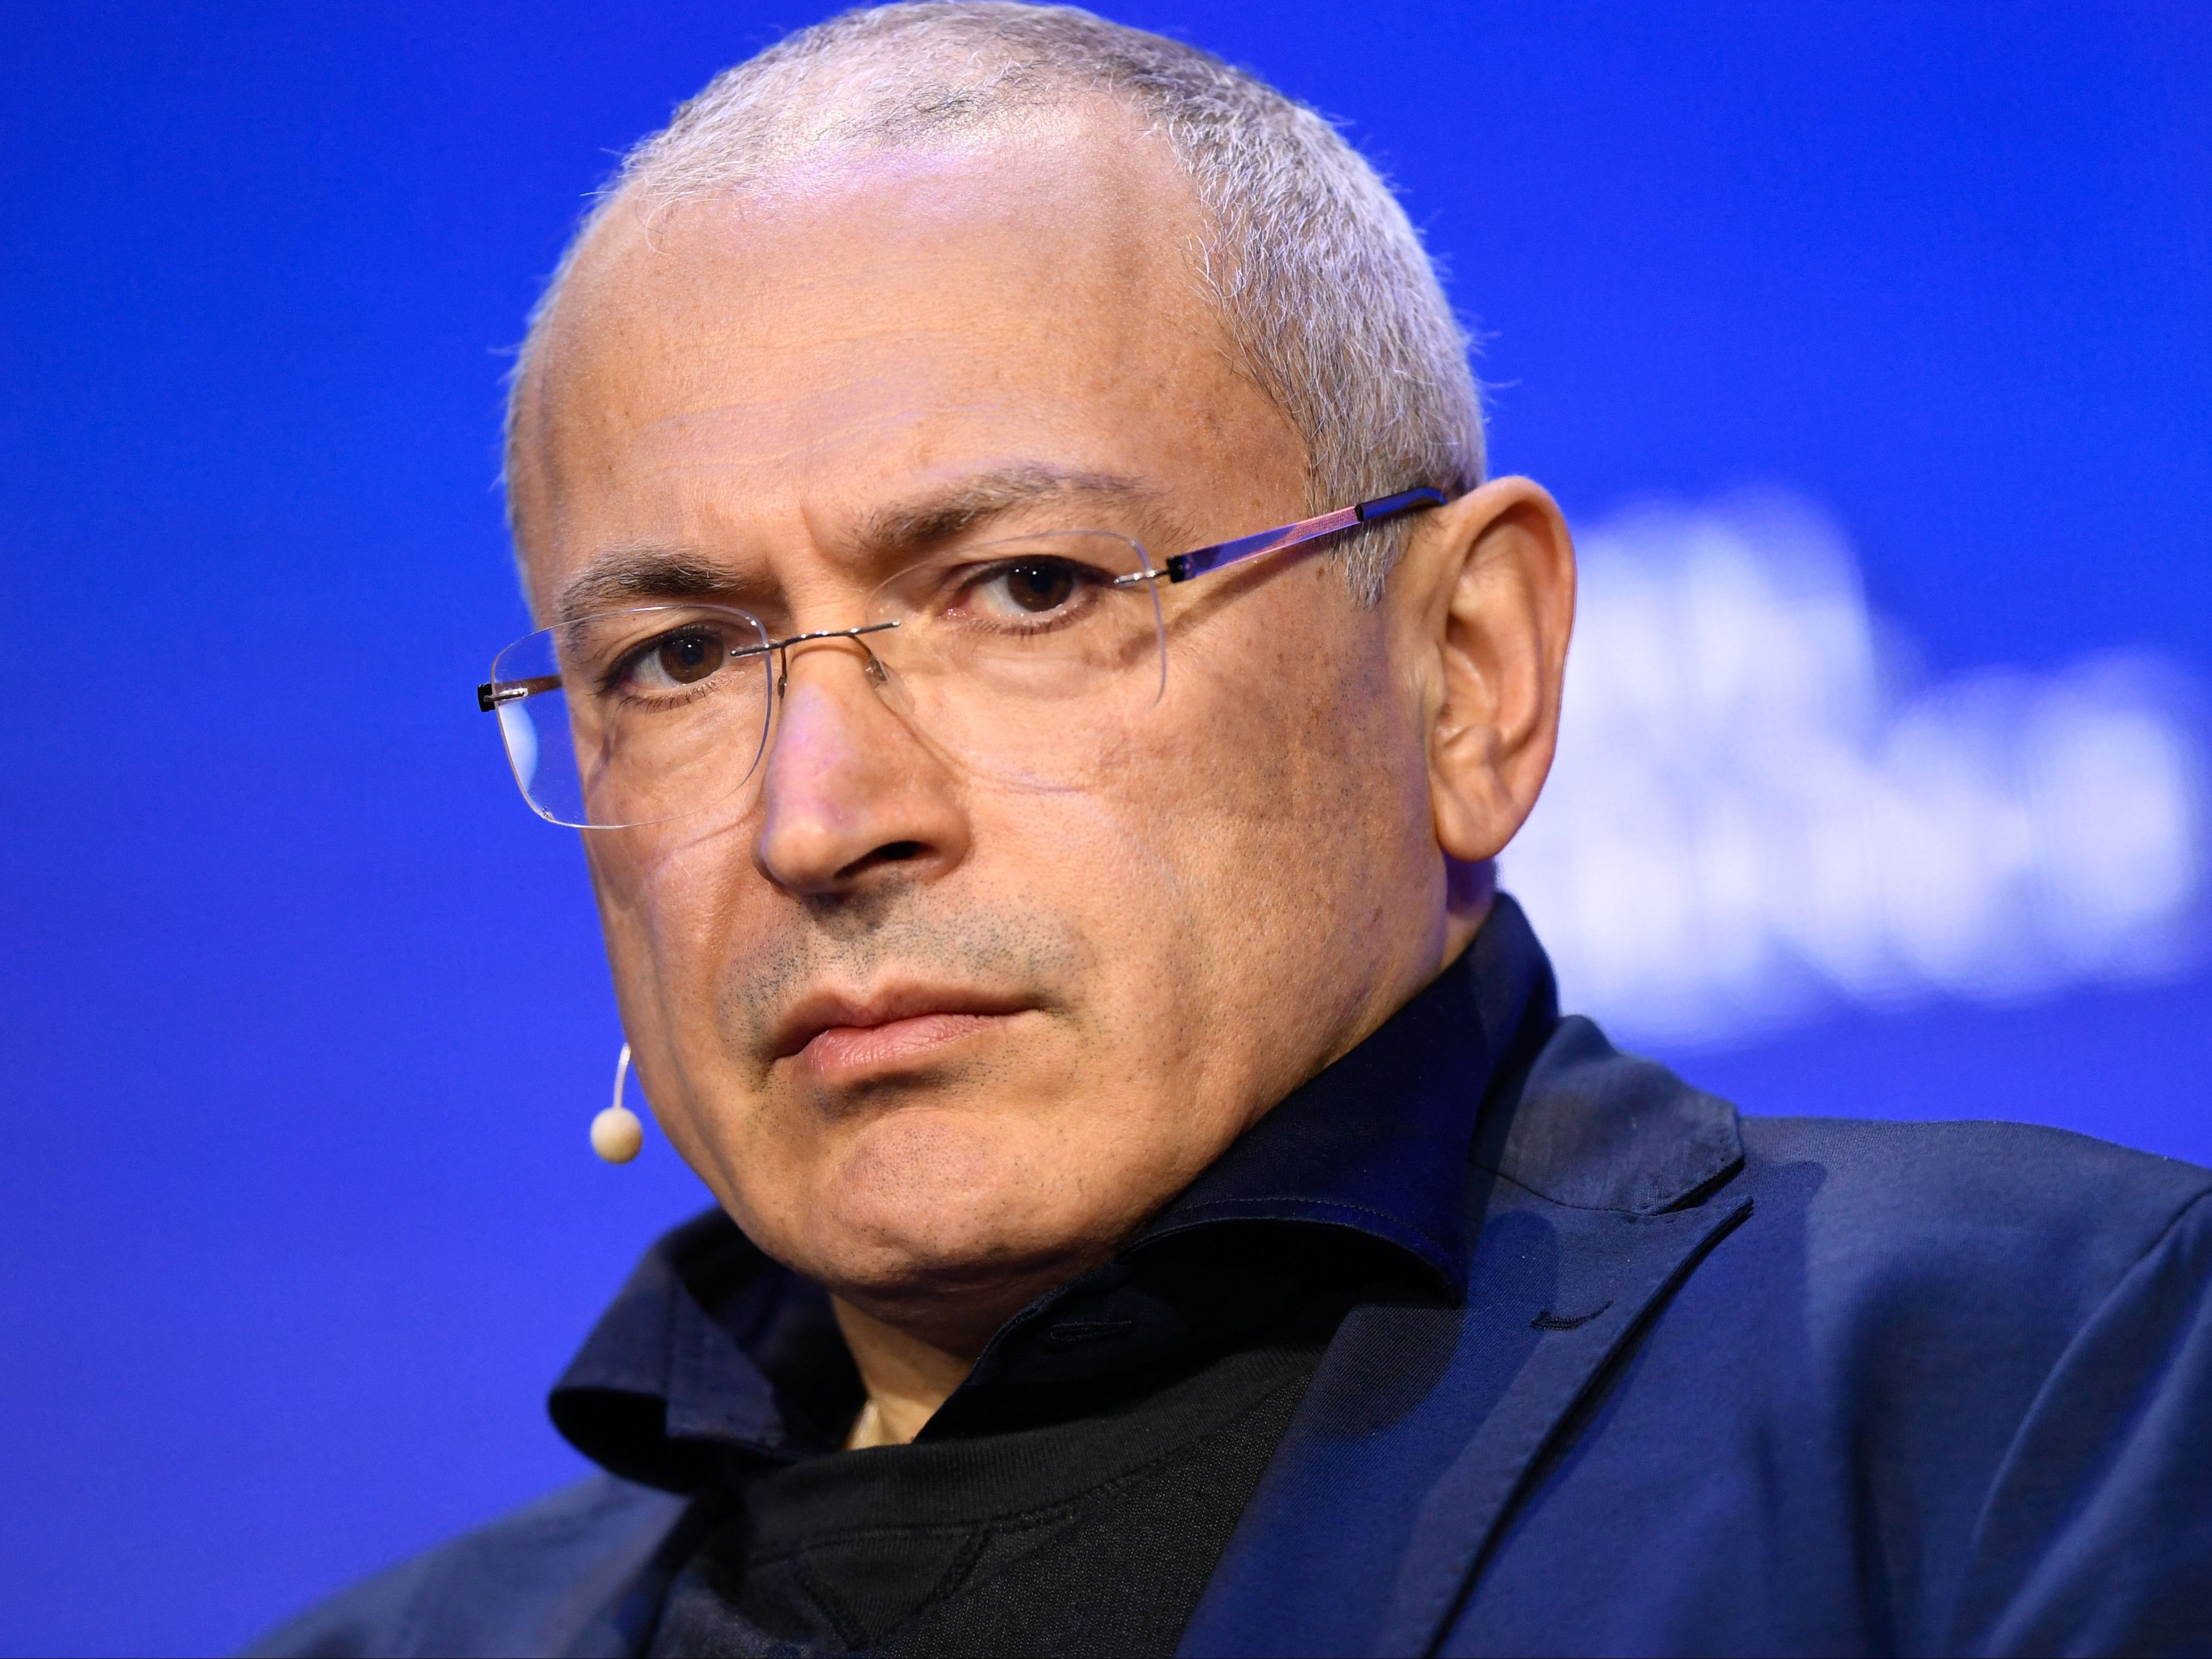 Mikhail Khodorkovsky says Putin sees the West’s failure to act over the annexation of Crimea as a weakness